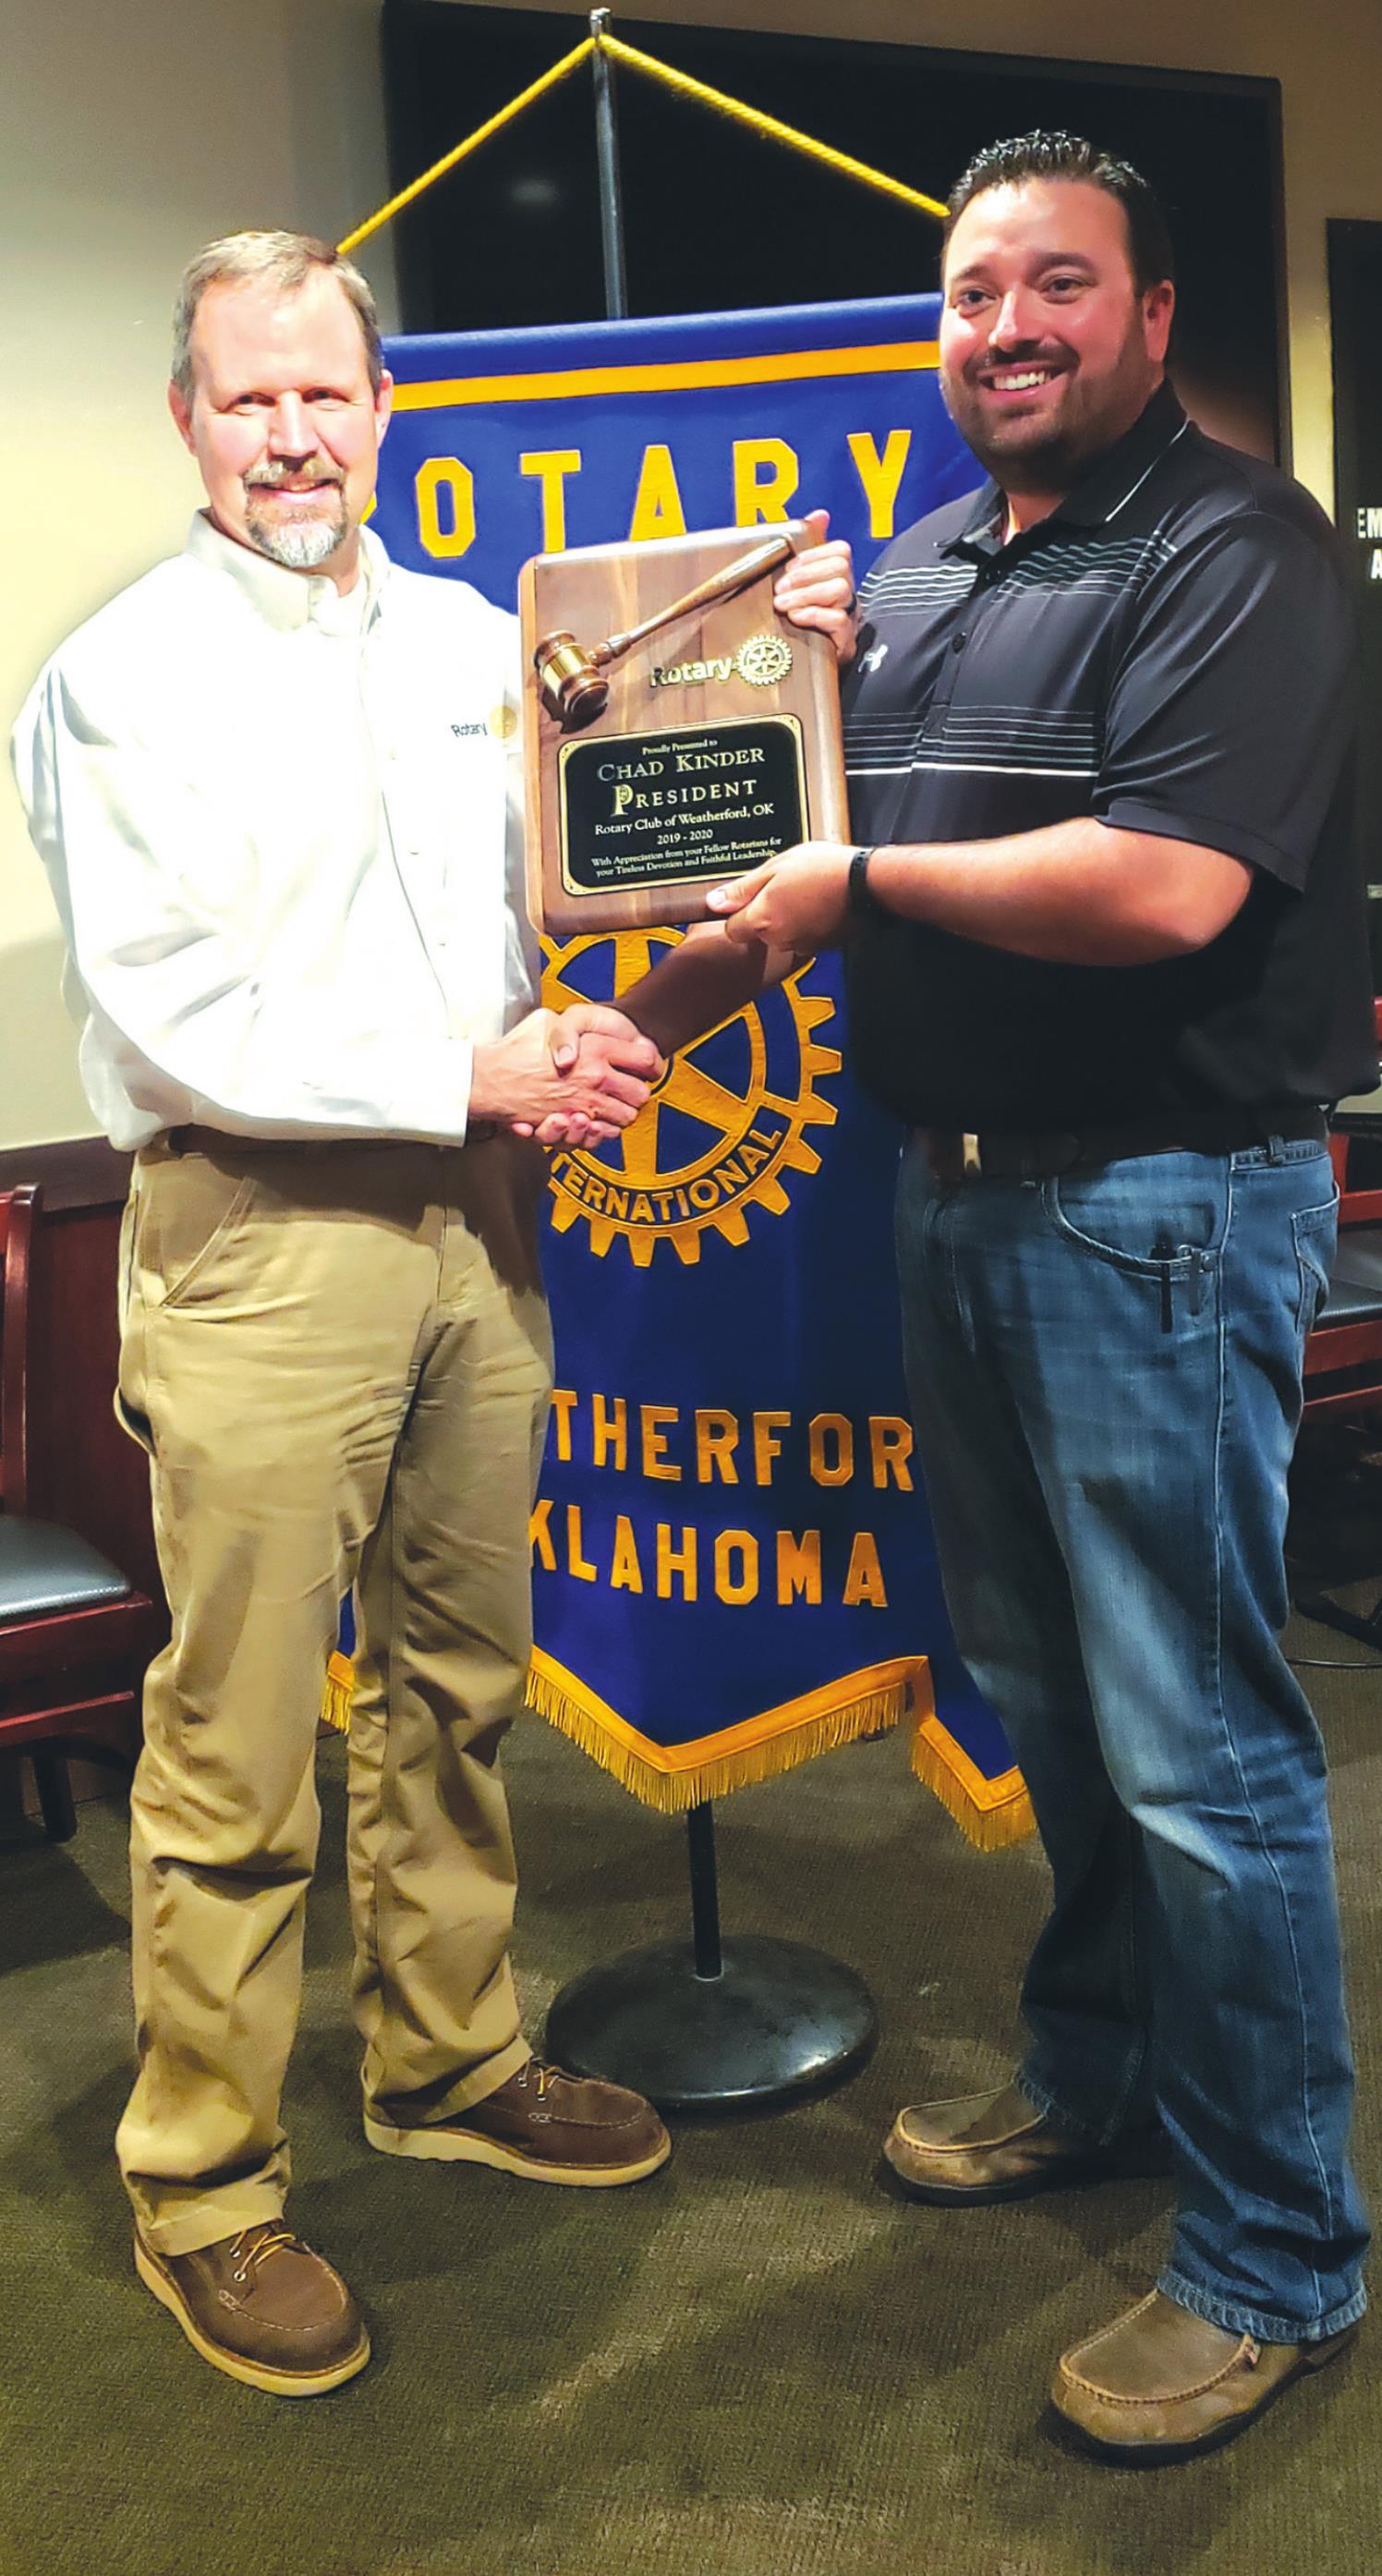 New Weatherford Rotary Club President Todd Earp, right, presents former Rotary Club President Dr. Chad Kinder with a plaque commemorating Kinder’s time as president. Leanna Cook/WDN